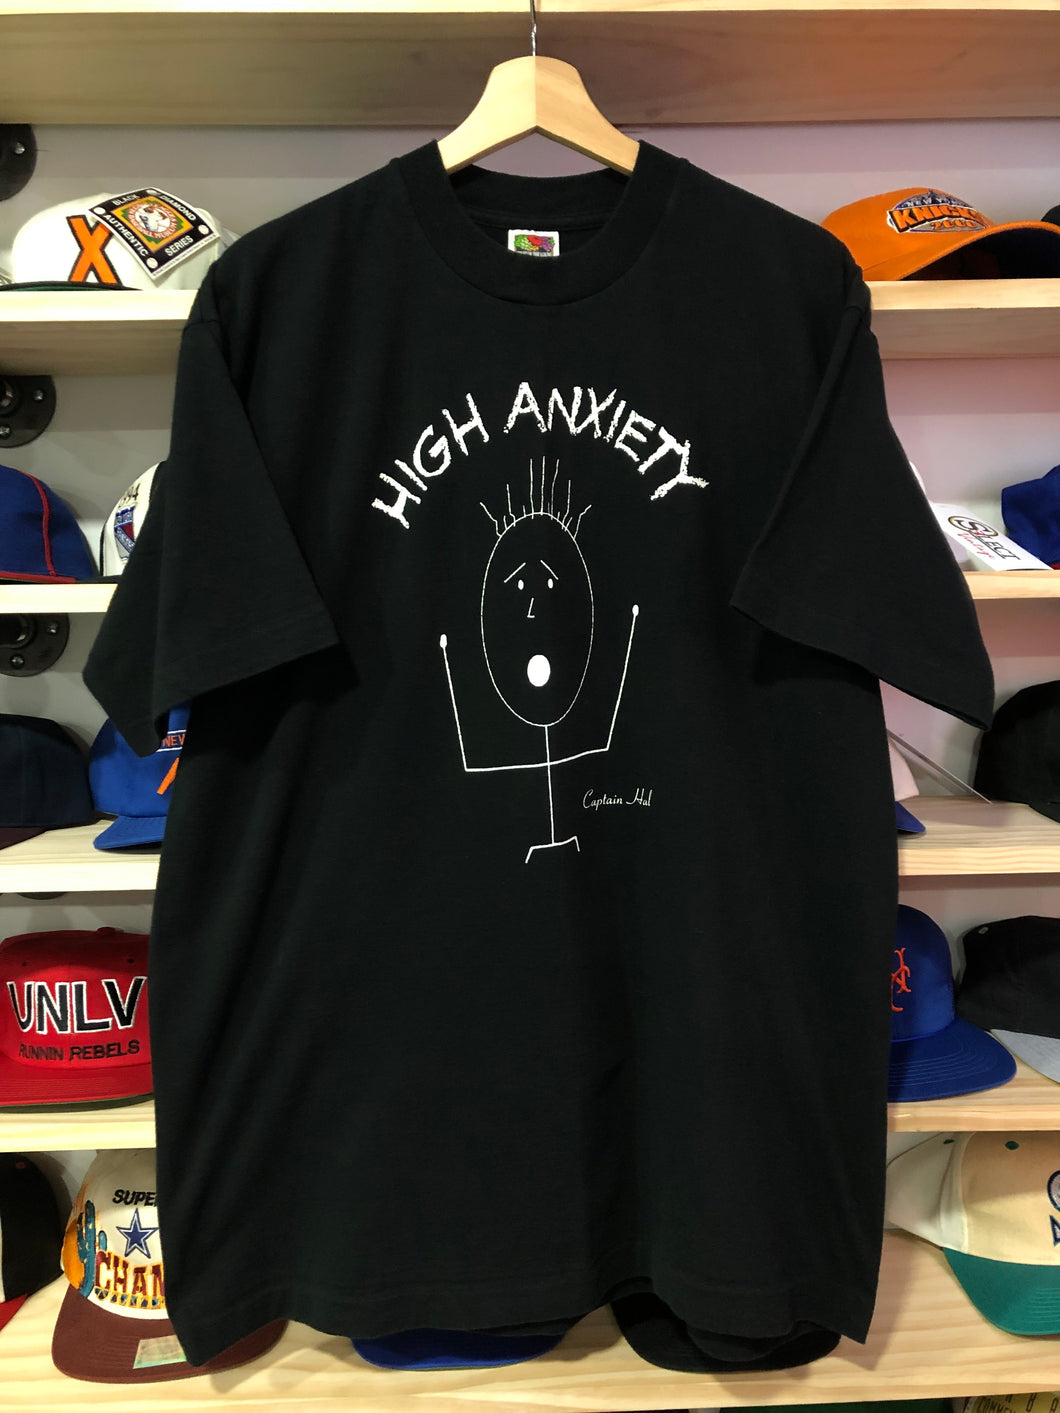 Vintage 90s High Anxiety Tee Size XL